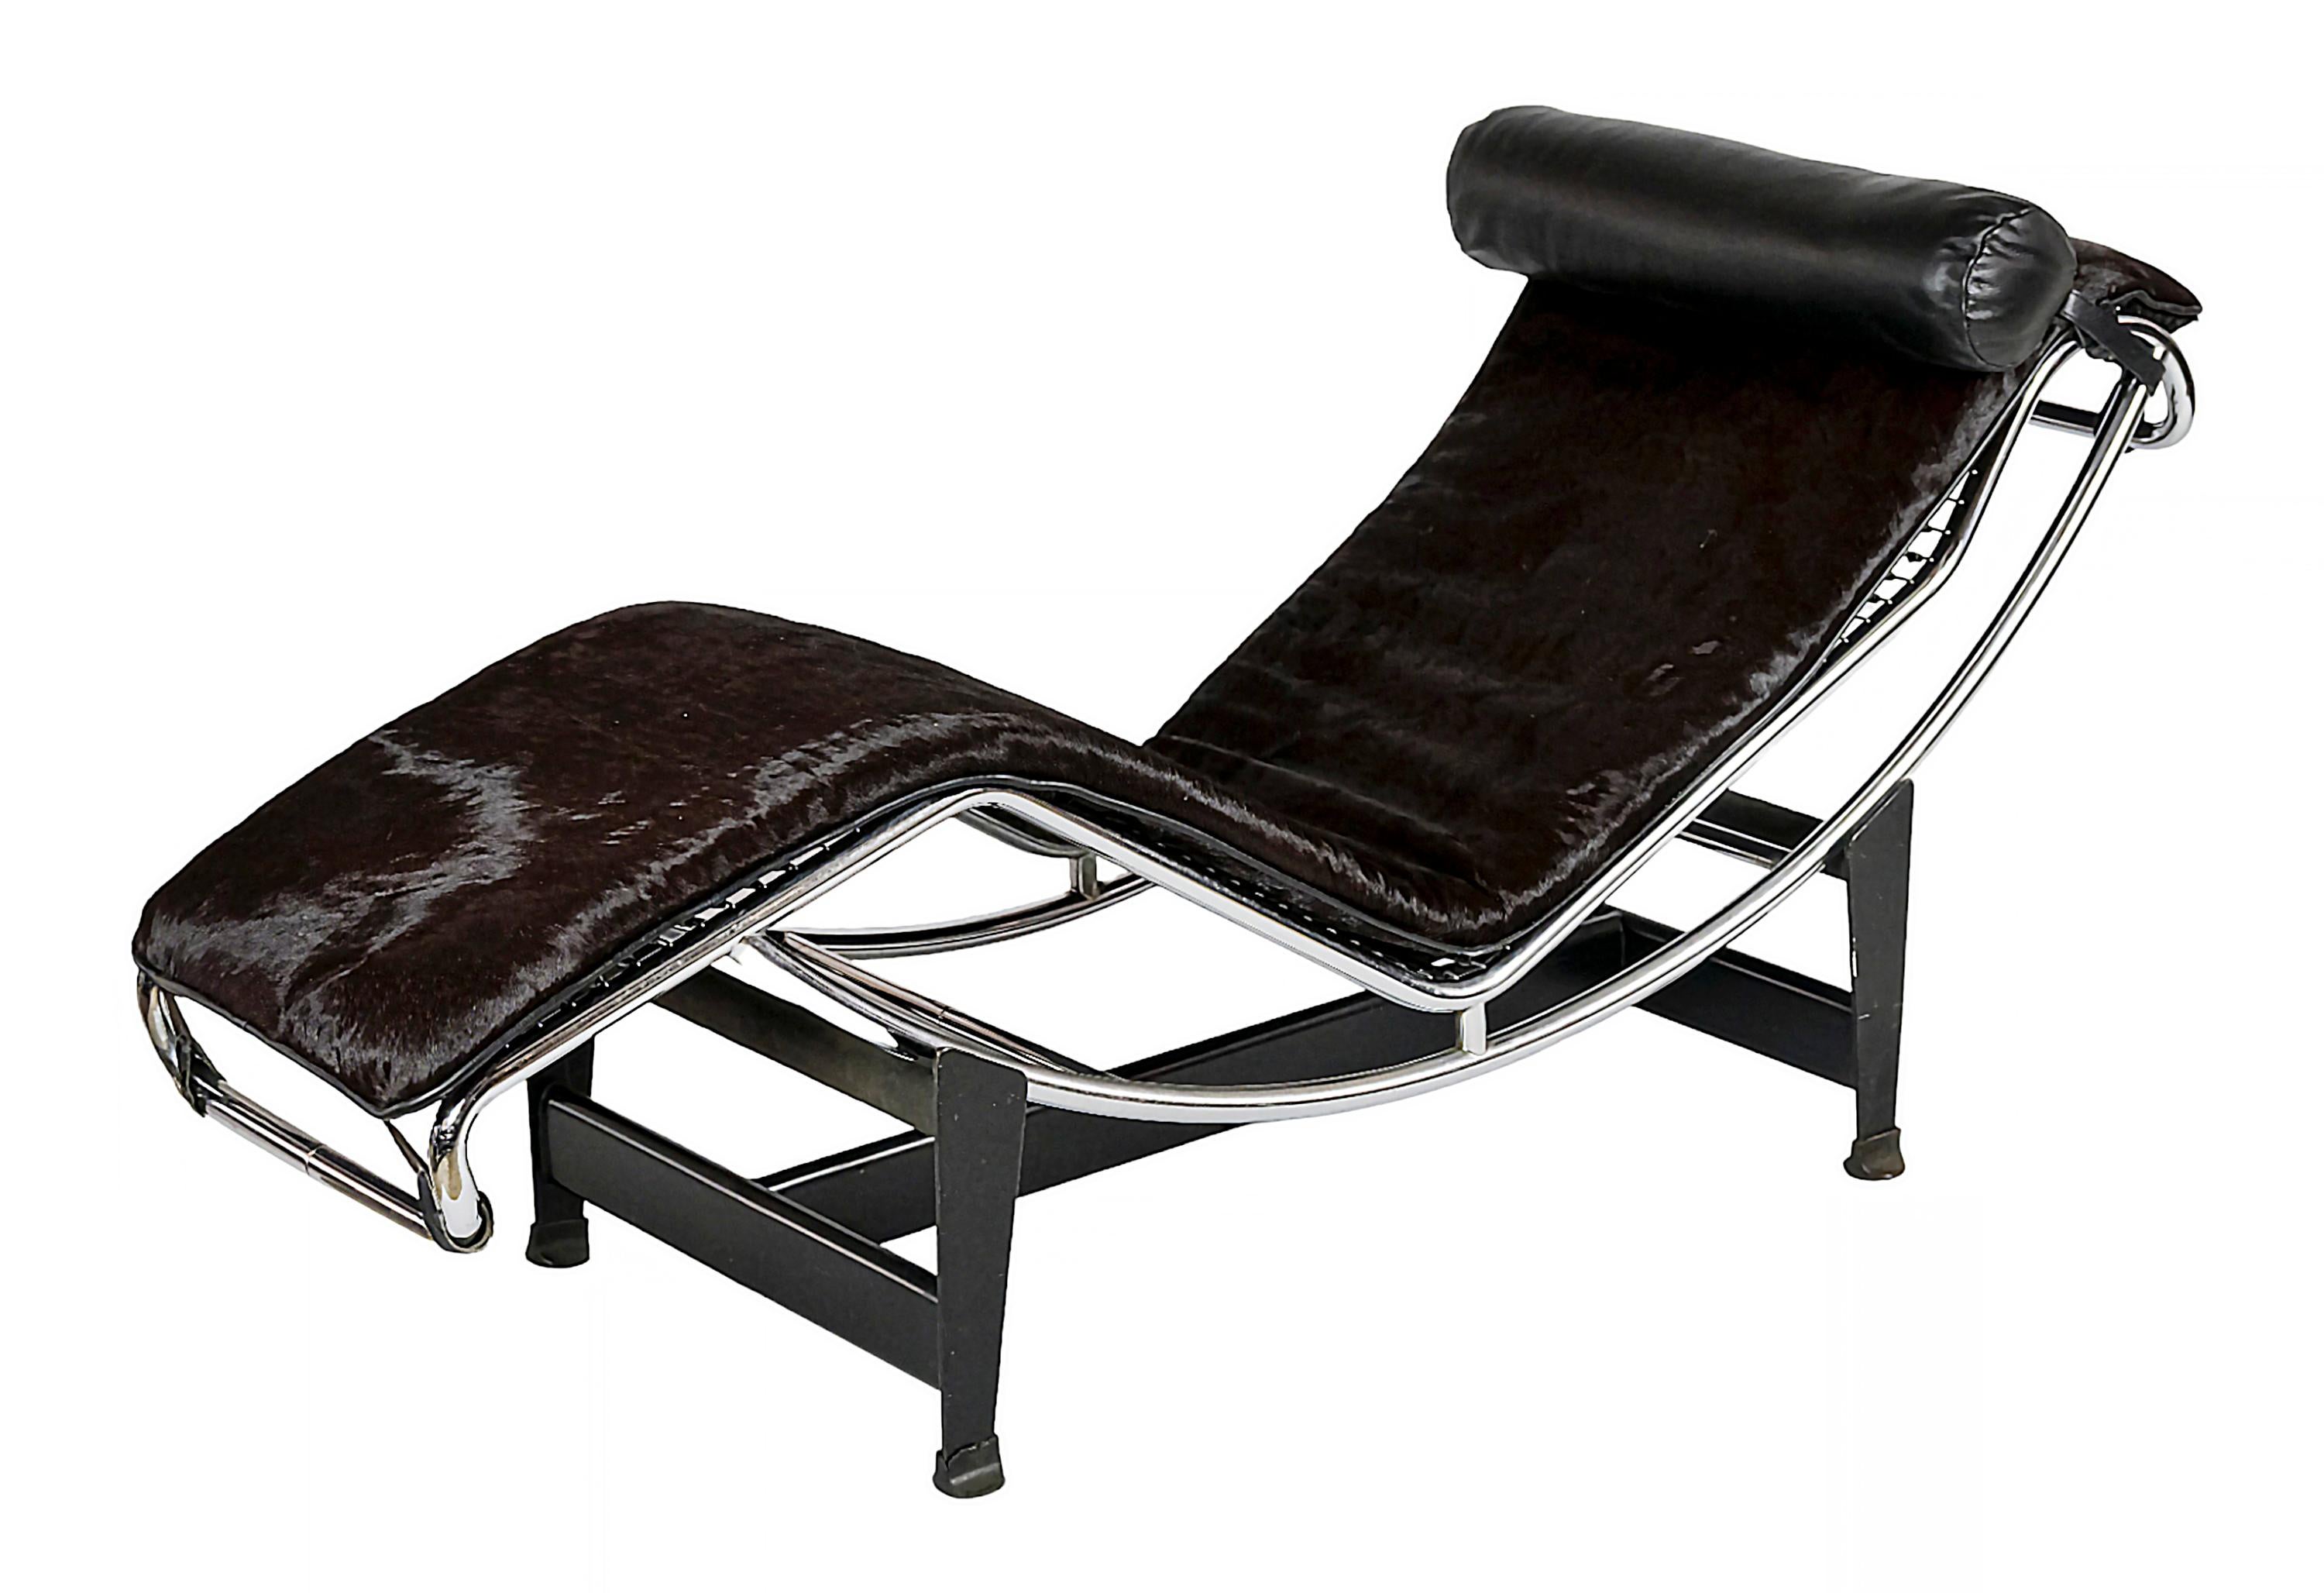 Vintage Le Corbusier, Pierre Jeanneret, Charlotte Perriand chaise lounge  LC4 created in 1928's.
Manufacture edition circa 1960's.
In natural cow/pony dark brown fur, black leather pillow, chromed steel tube frame, black base/legs.
Stamped and